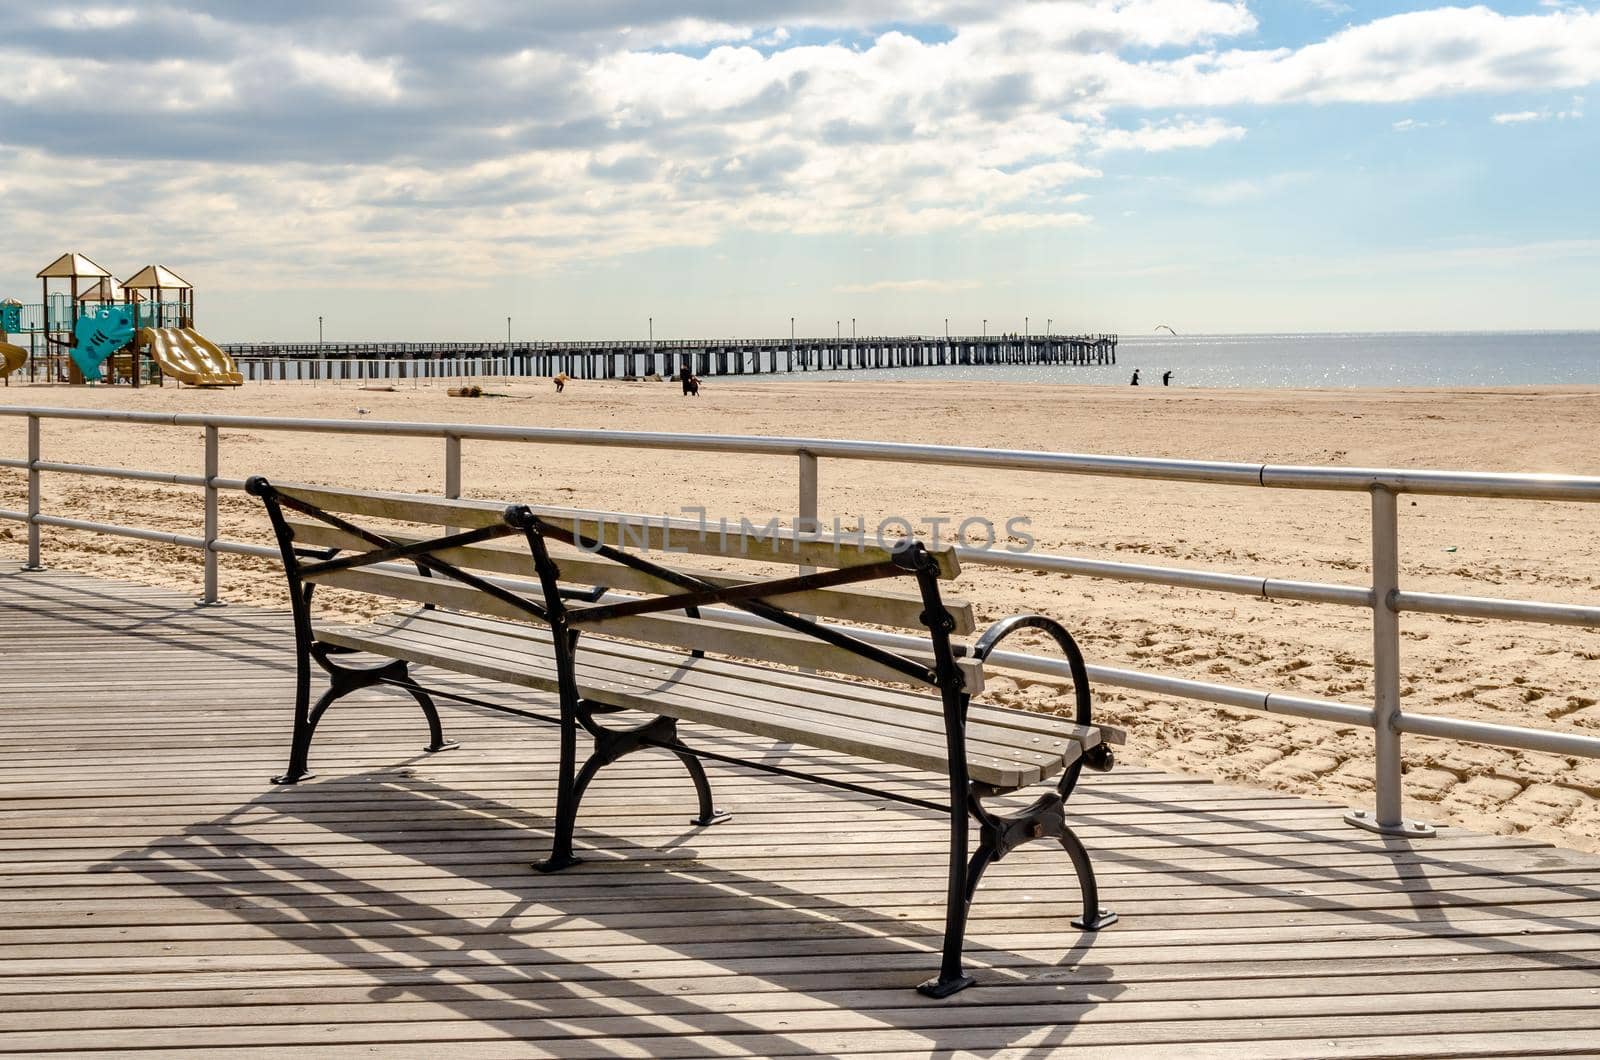 Bench at Beach Promenade of Coney Island with Pat Auletta Steeplechase Pier in Background, NYC by bildgigant